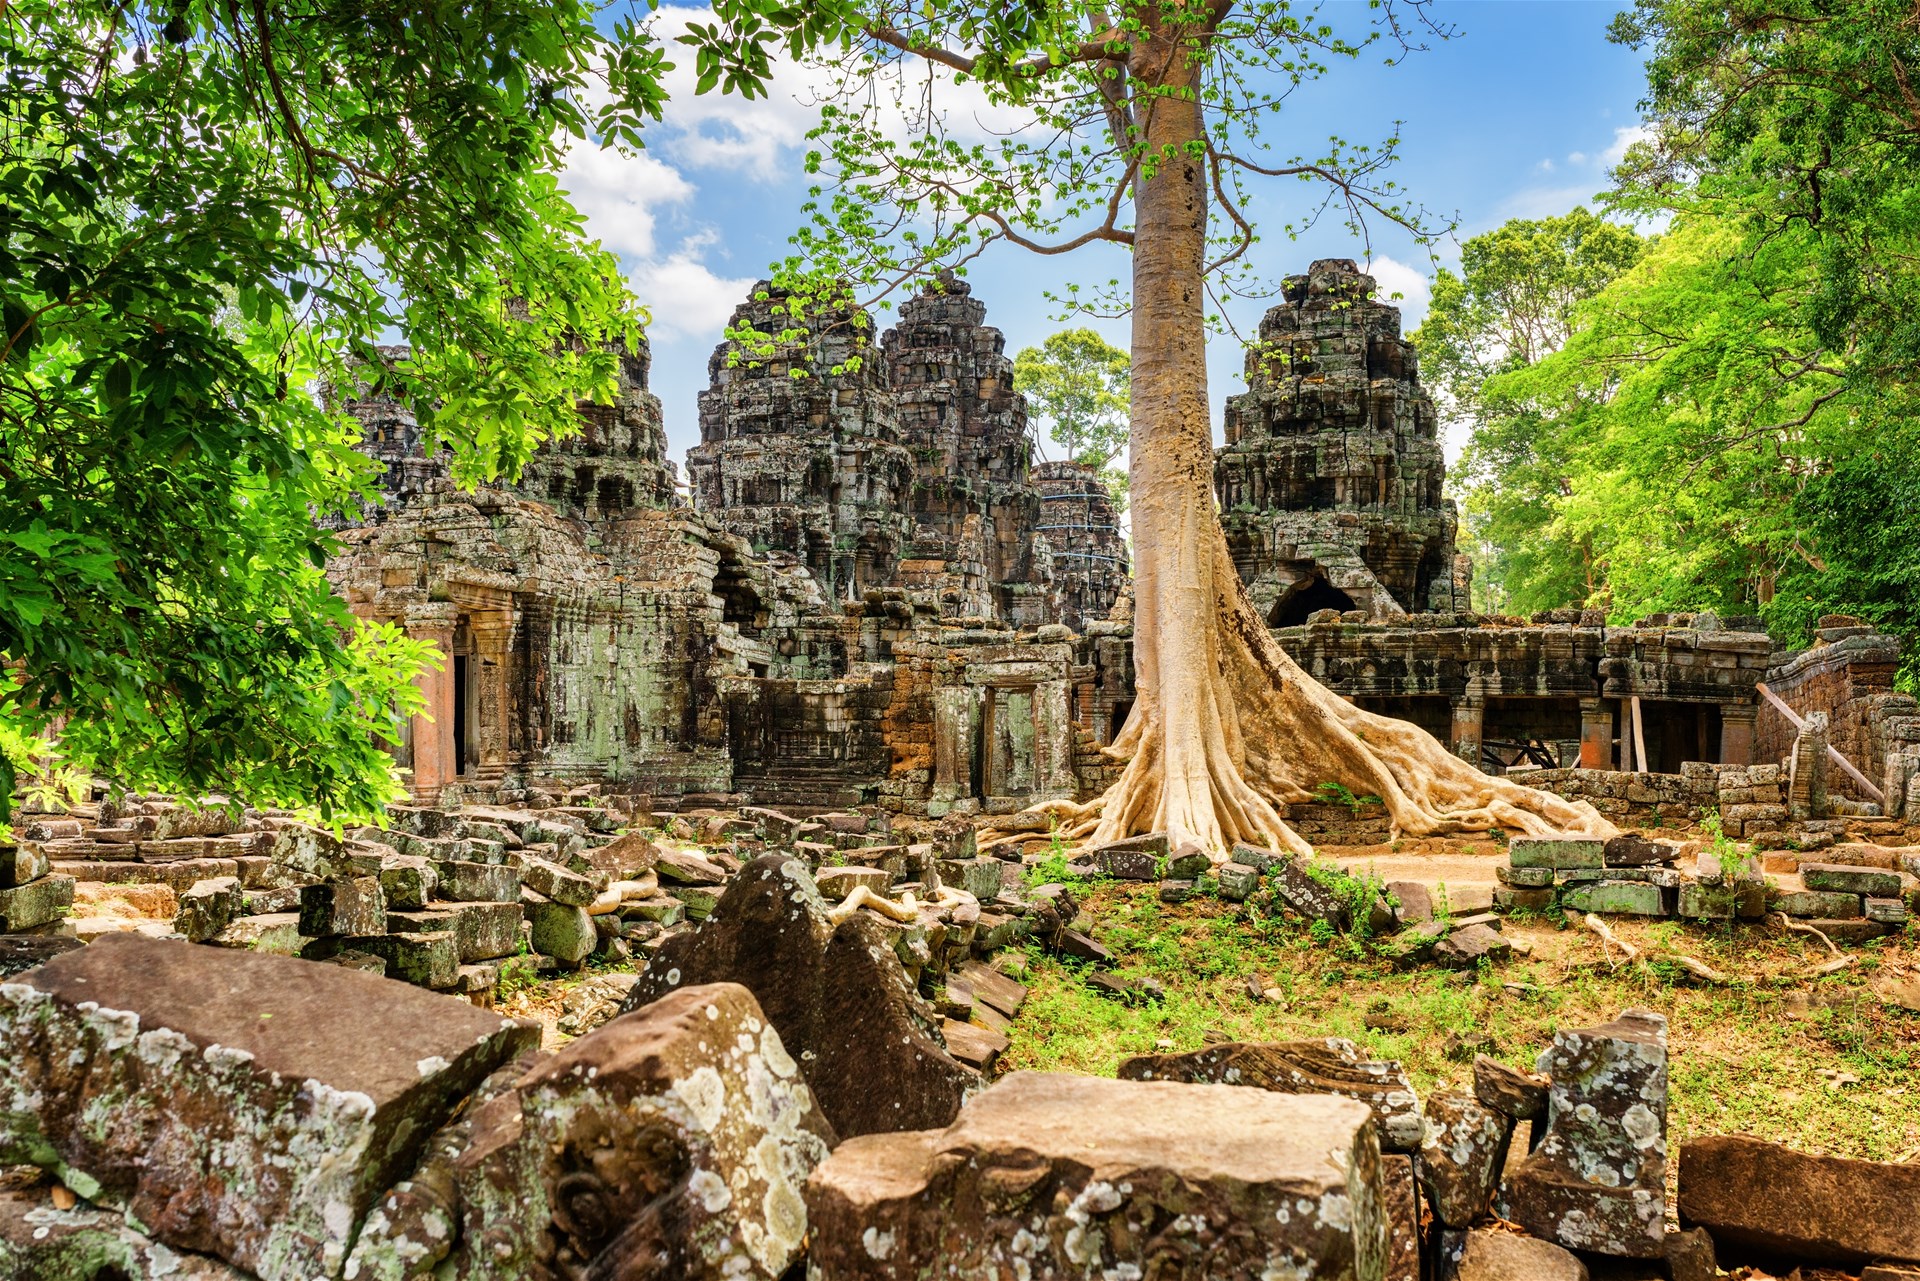 Cambodia image Siem Reap, Cambodia HD wallpaper and background